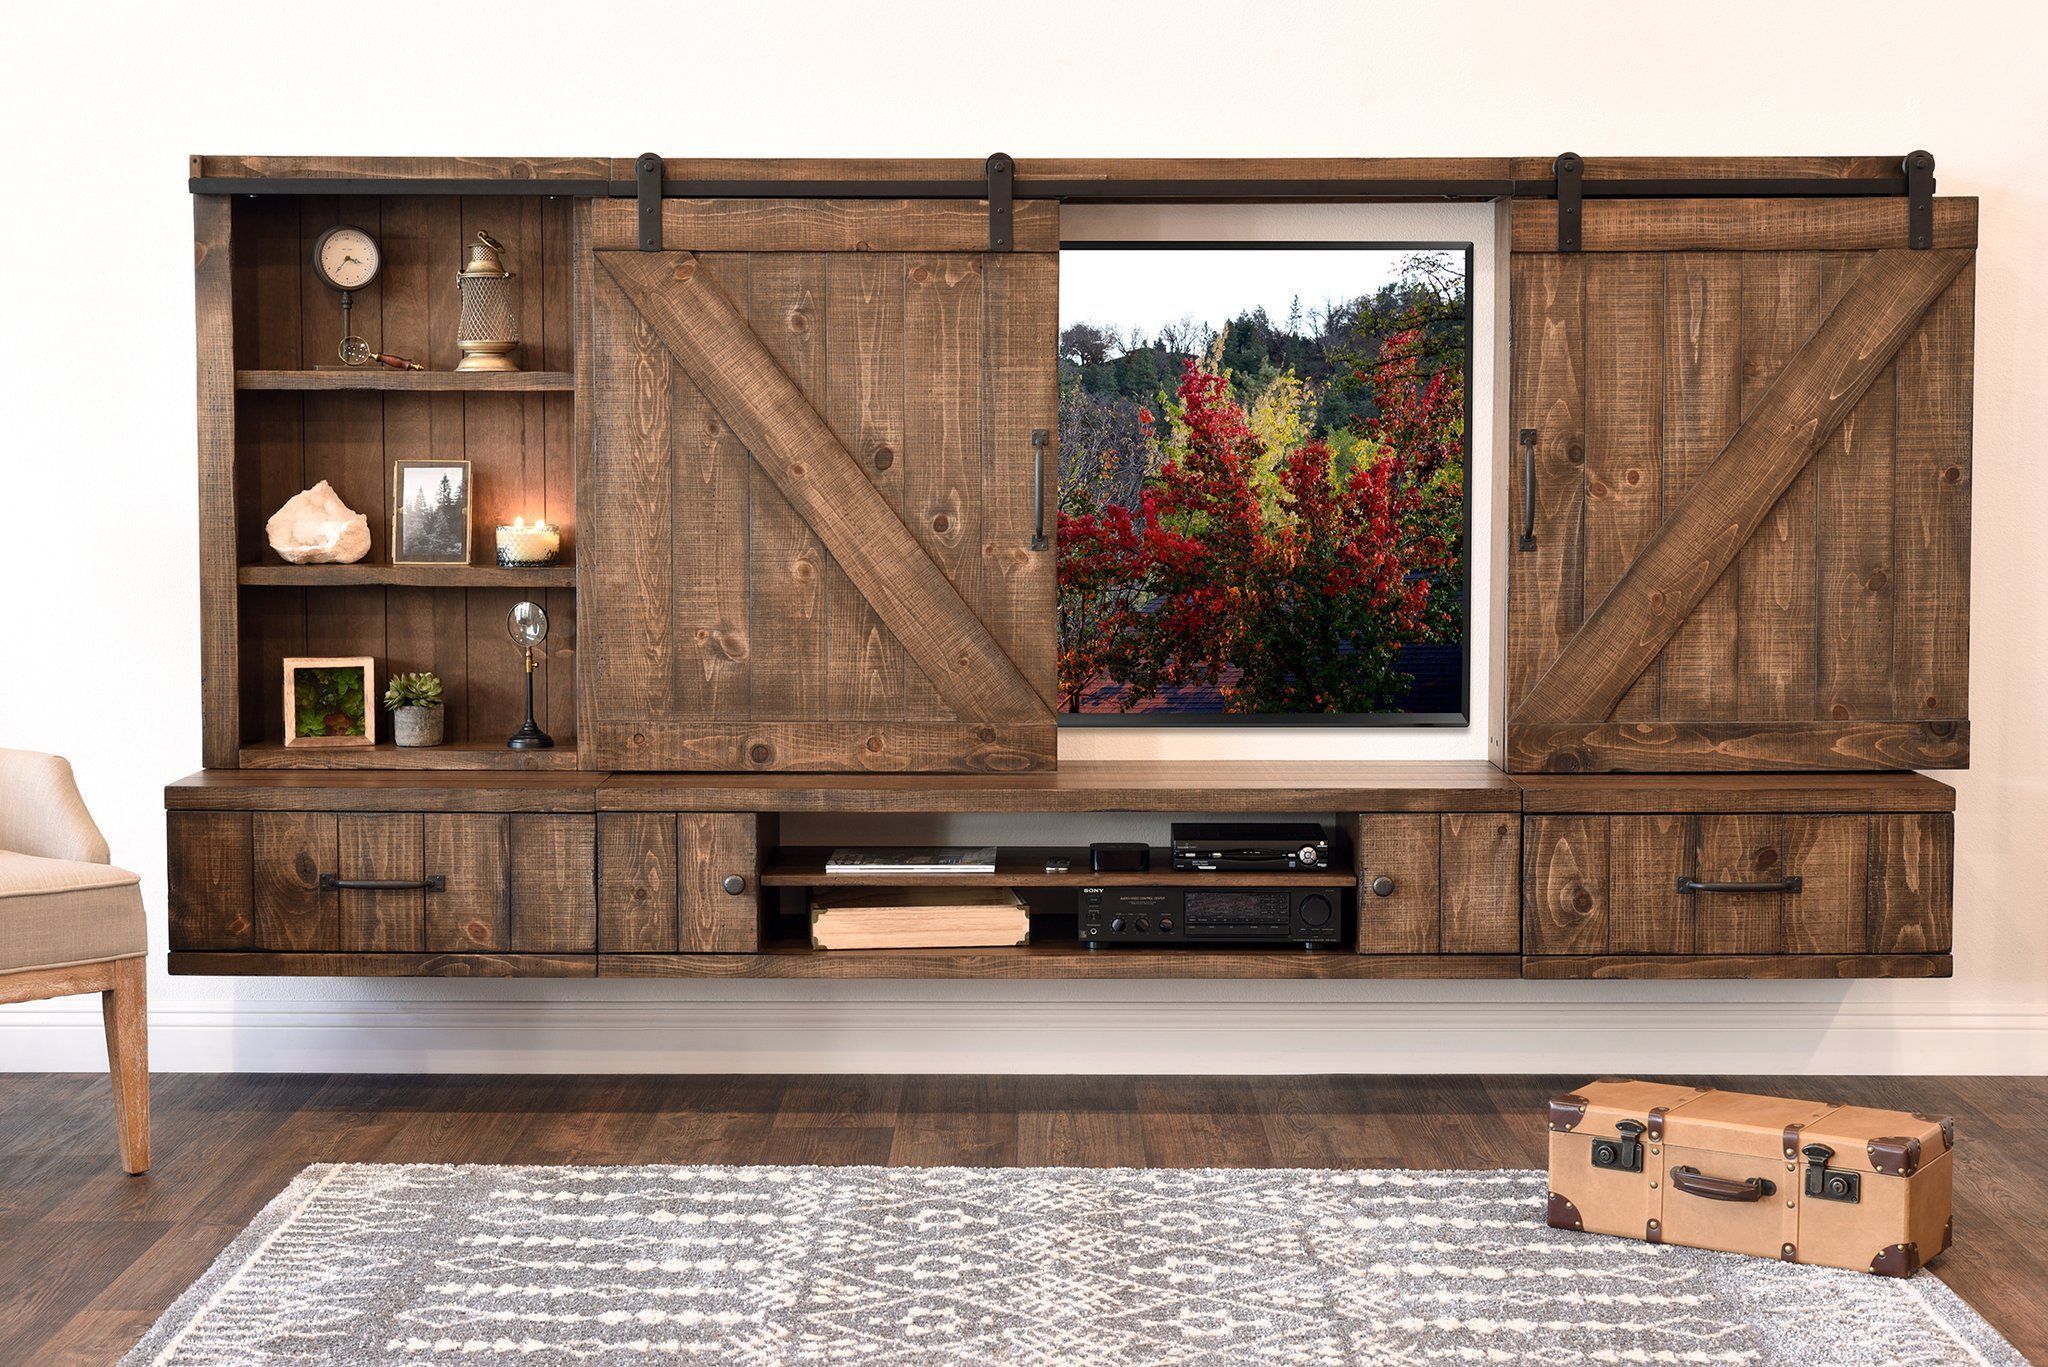 Farmhouse Barn Door Entertainment Center Floating Tv Stand – Spice For Farmhouse Stands With Shelves (View 9 of 20)